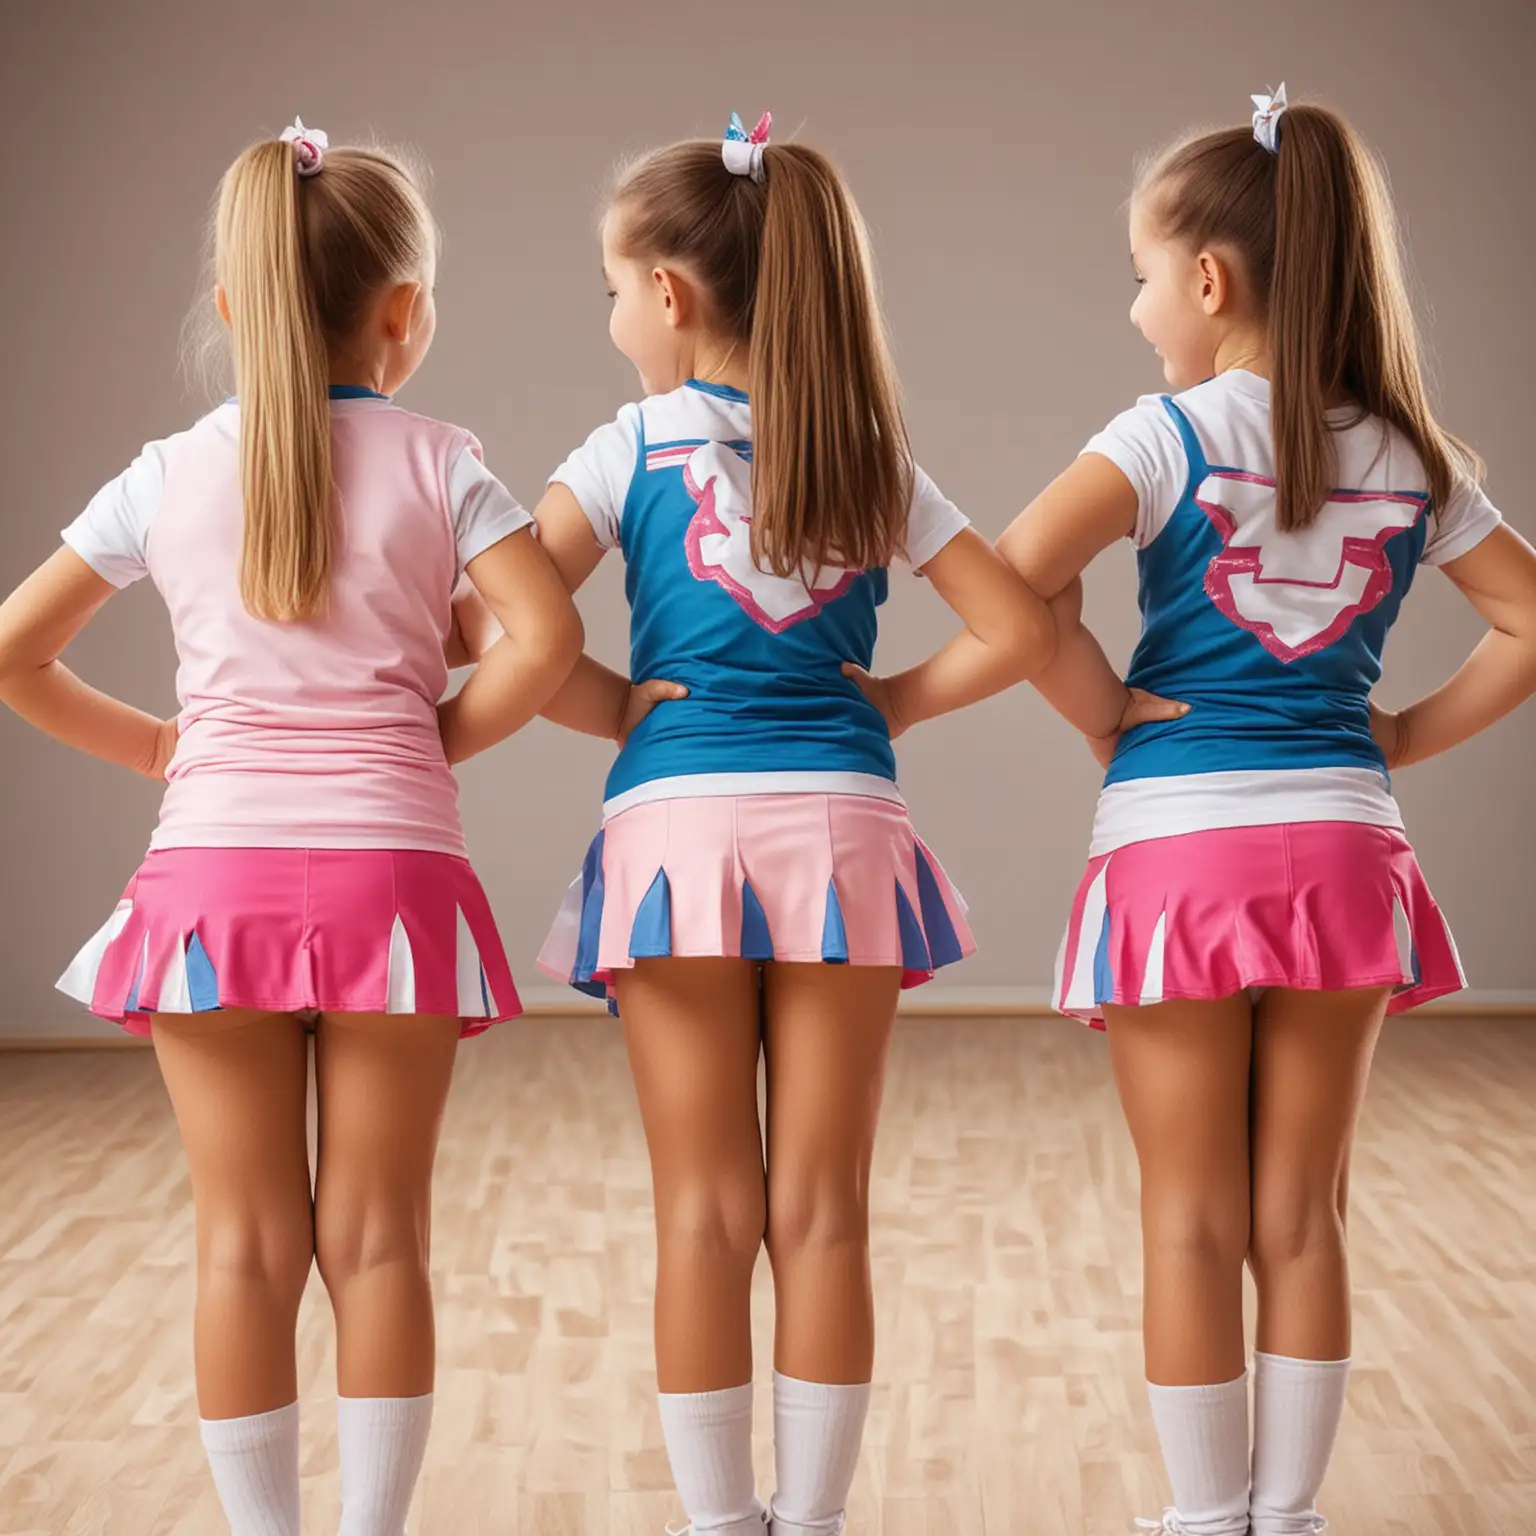 Cheerleading Children with Playful Attire Back View